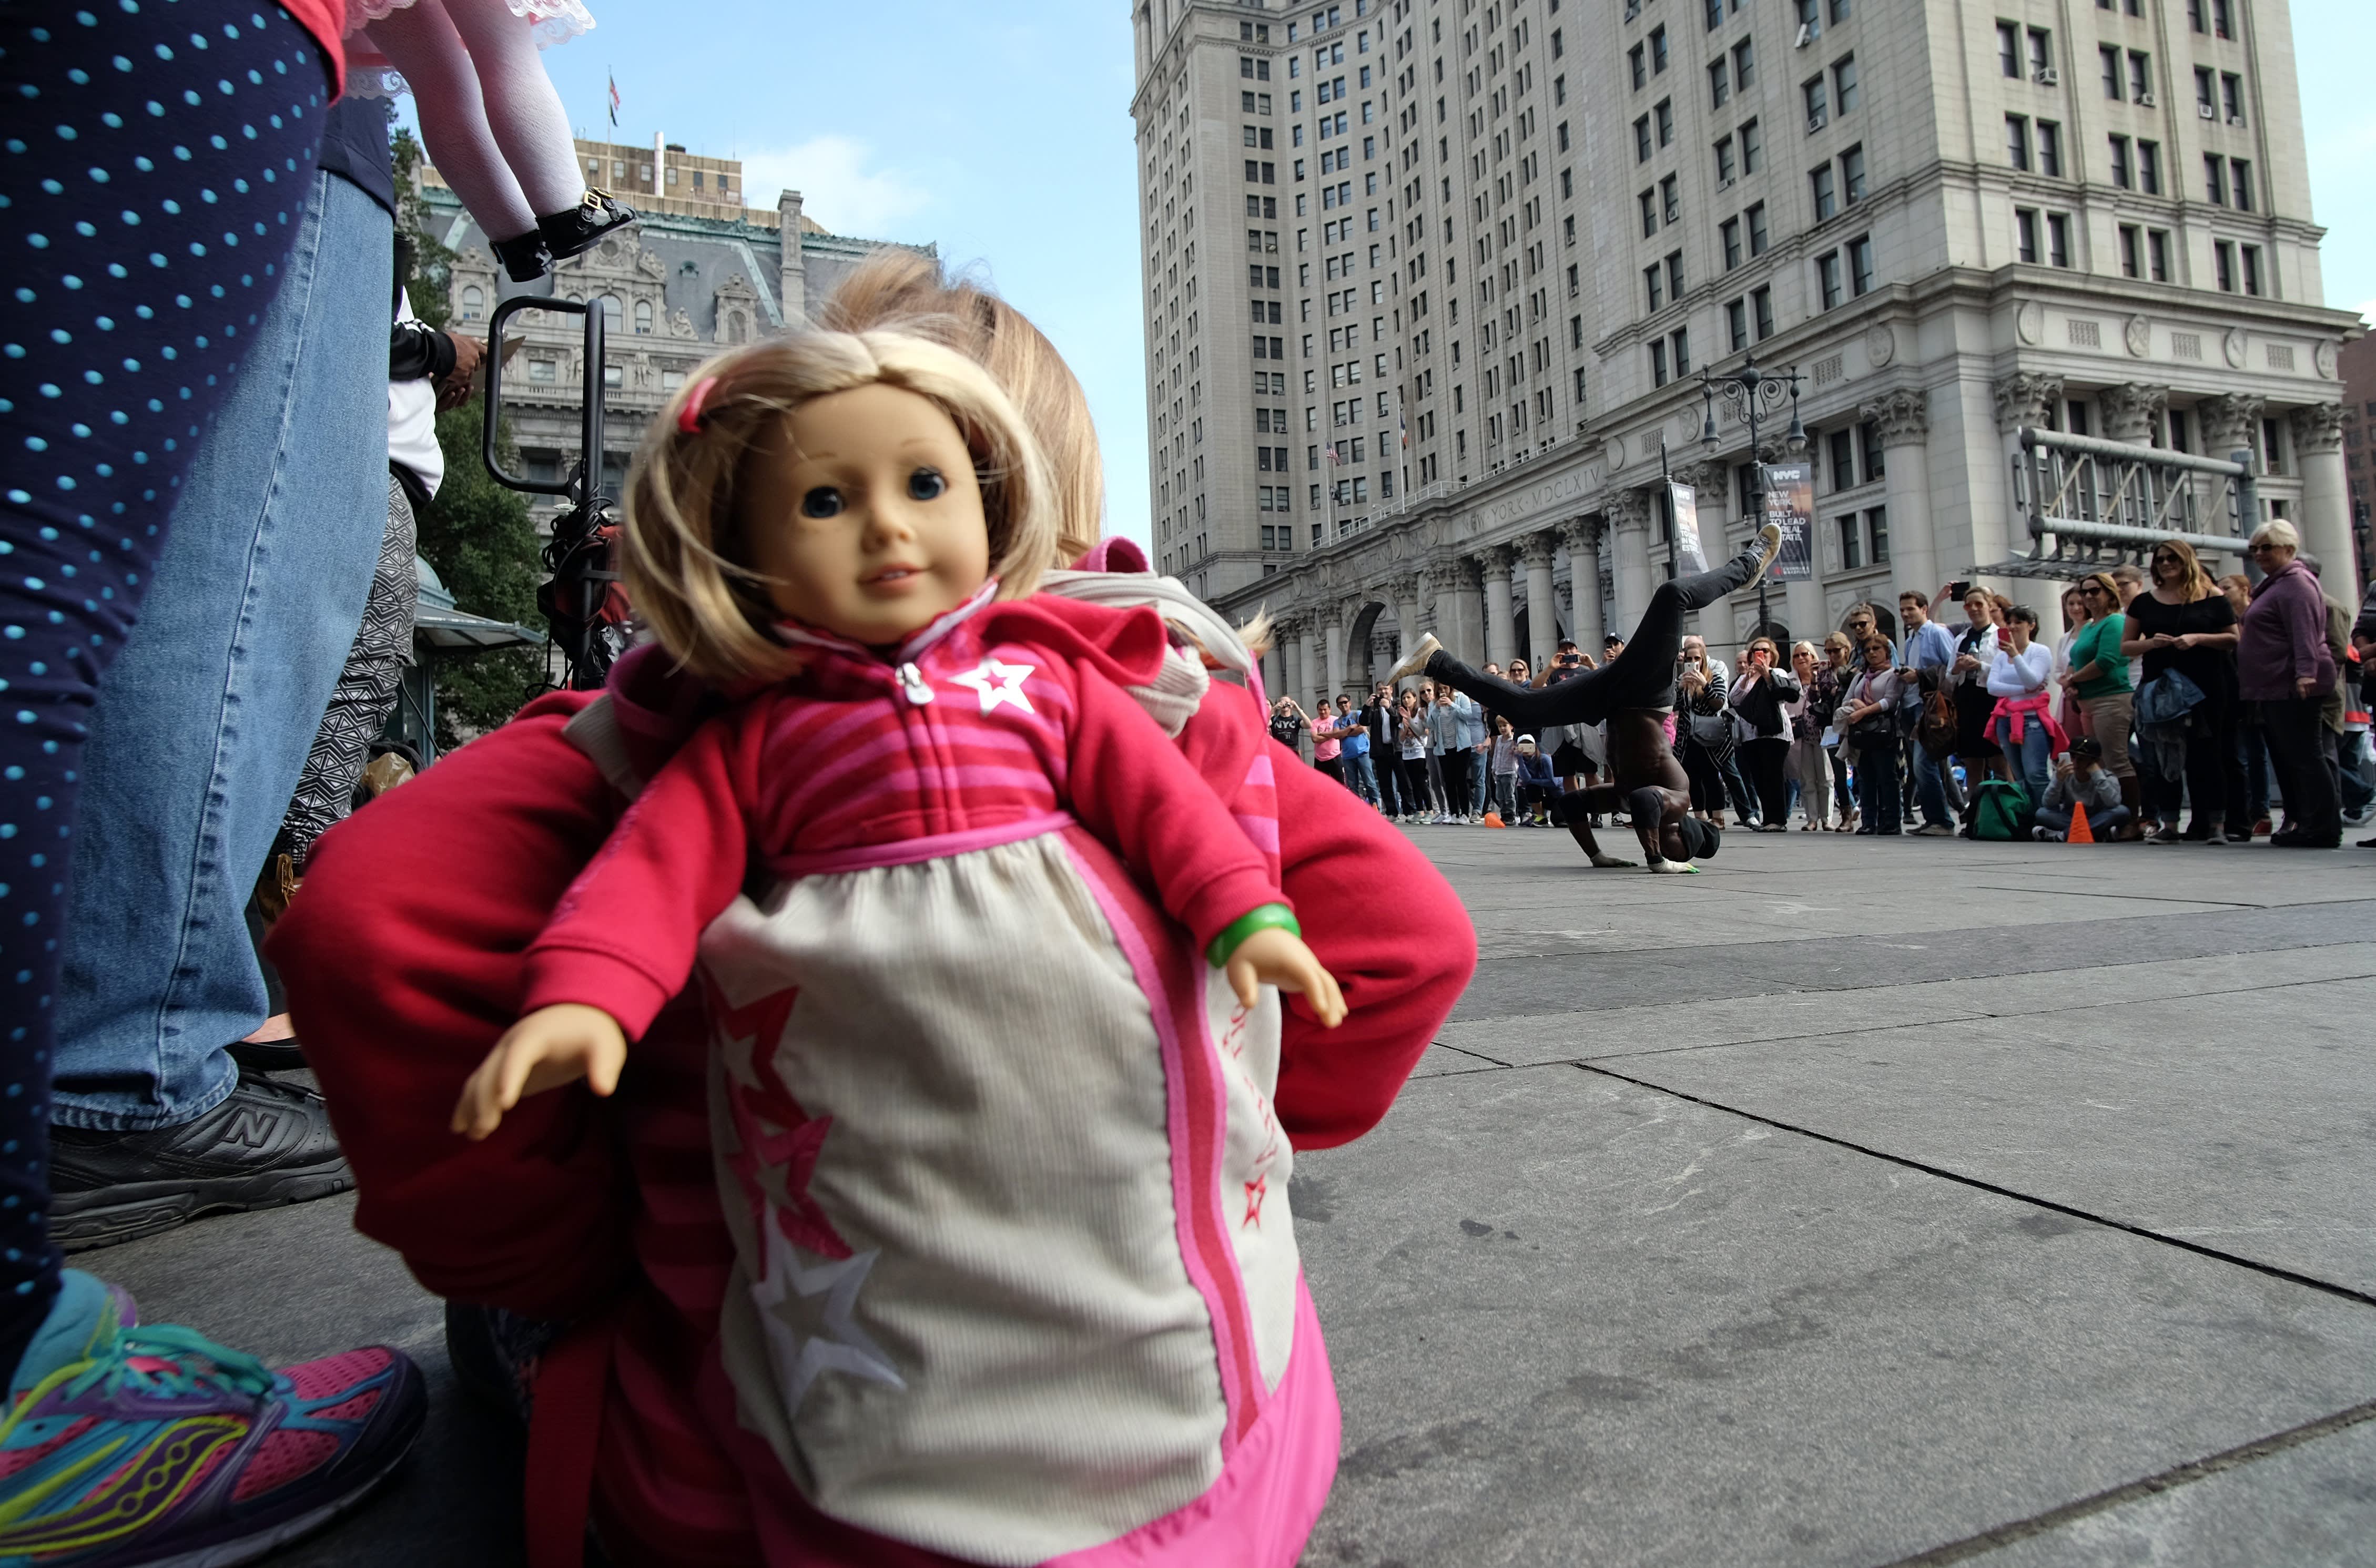 This retired grandma spends $1,500 a year giving American Girl dolls to kids in need—with a little help from Reddit